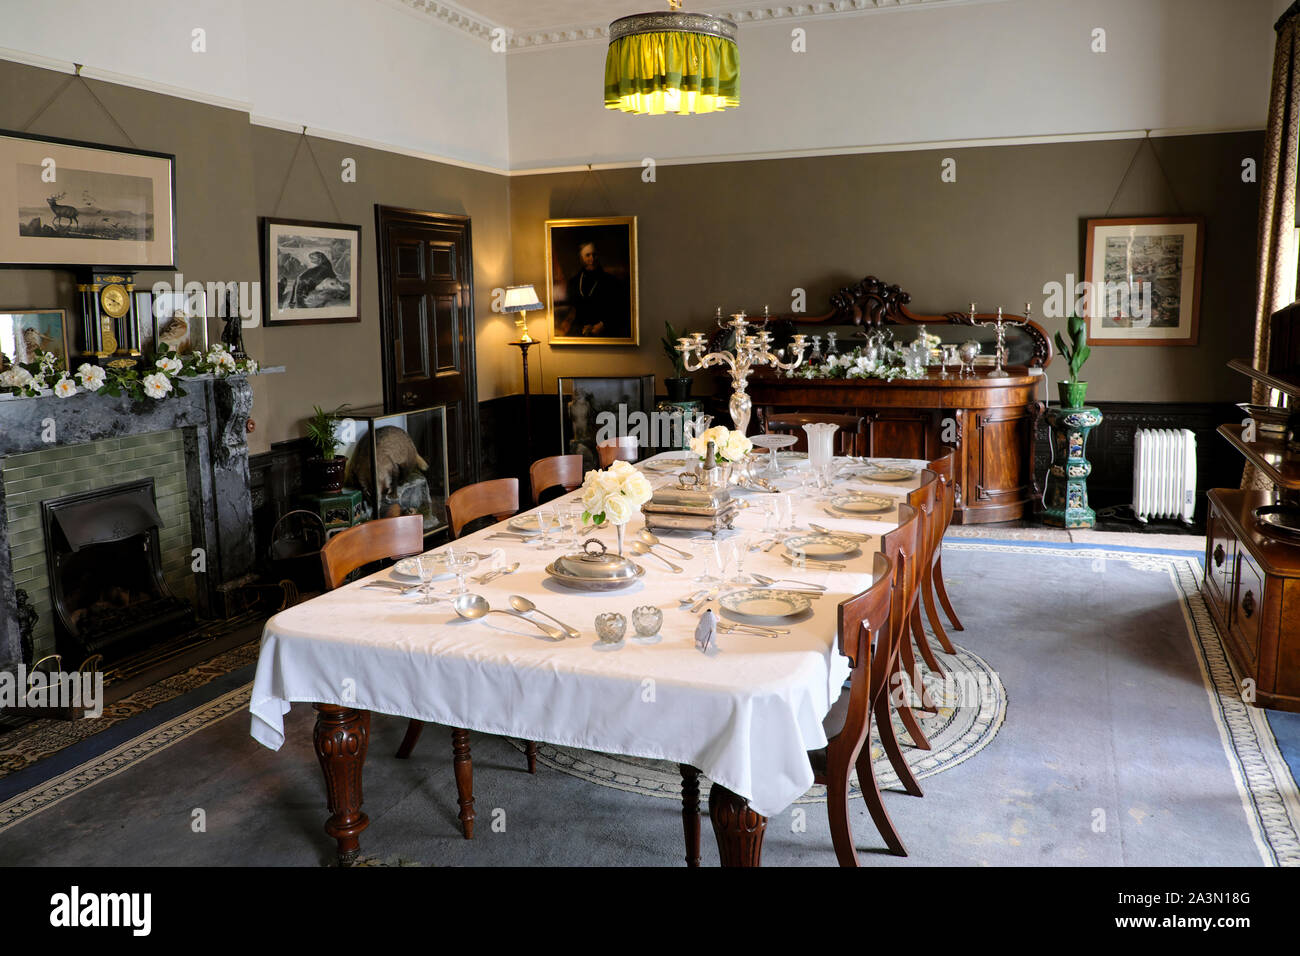 Dining room, furniture, table, chairs and setting inside house at Llanerchaeron in Ceredigion Wales UK   KATHY DEWITT Stock Photo